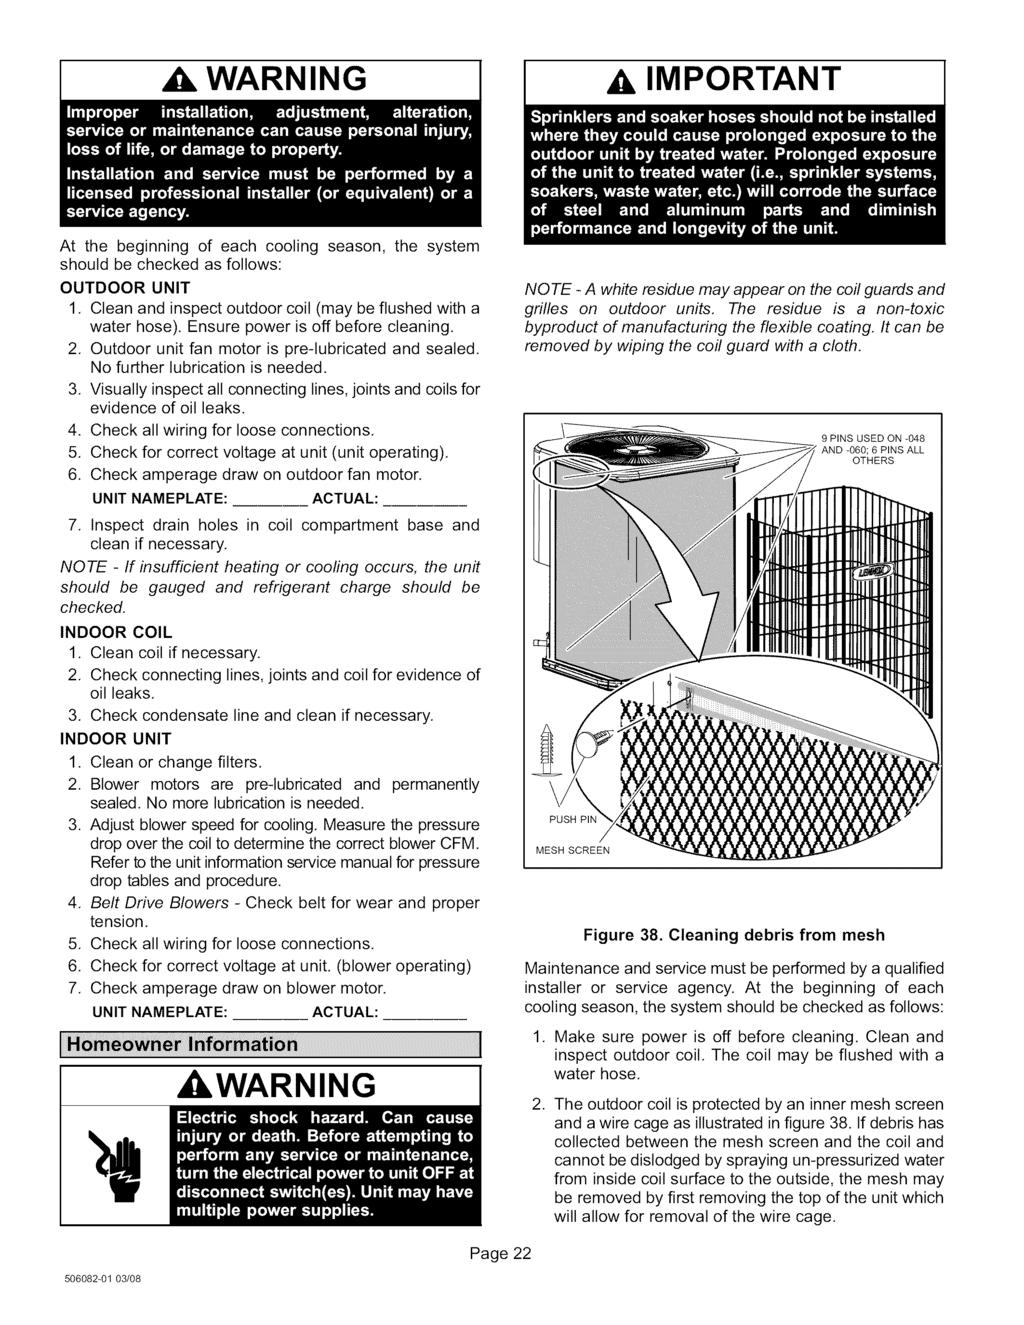 WARNING I IMPORTANT At the beginning of each cooling season, the system should be checked as follows: OUTDOOR UNIT 1, Clean and inspect outdoor coil (may be flushed with a water hose).